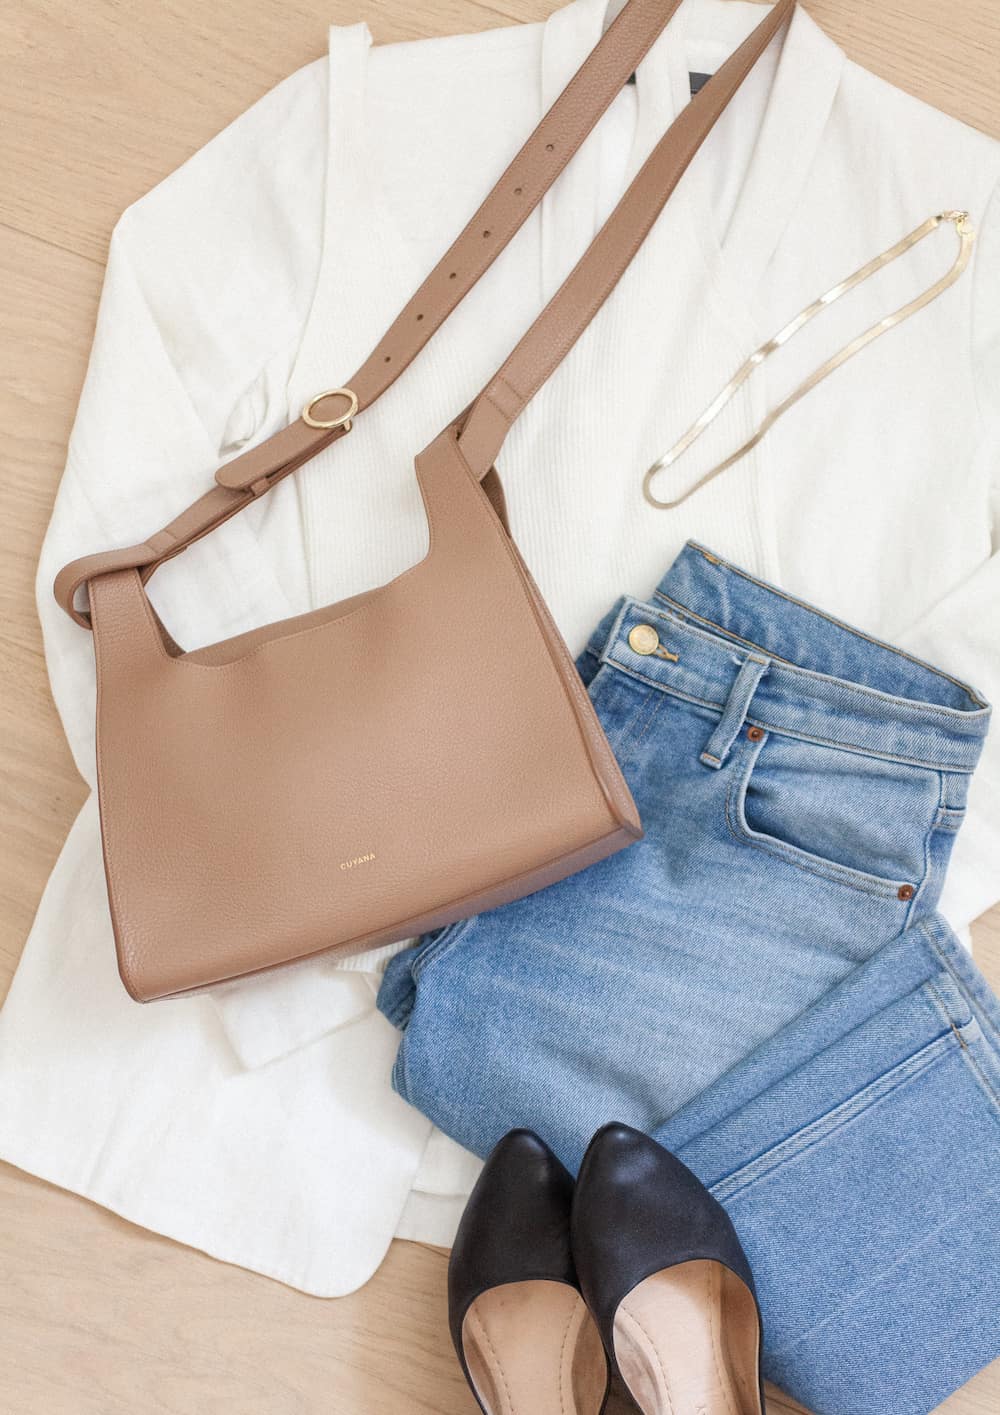 image of n outfit flatlay with a light brown leather Cuyana bag with a white blazer, blue jeans, black flats, and a gold necklace